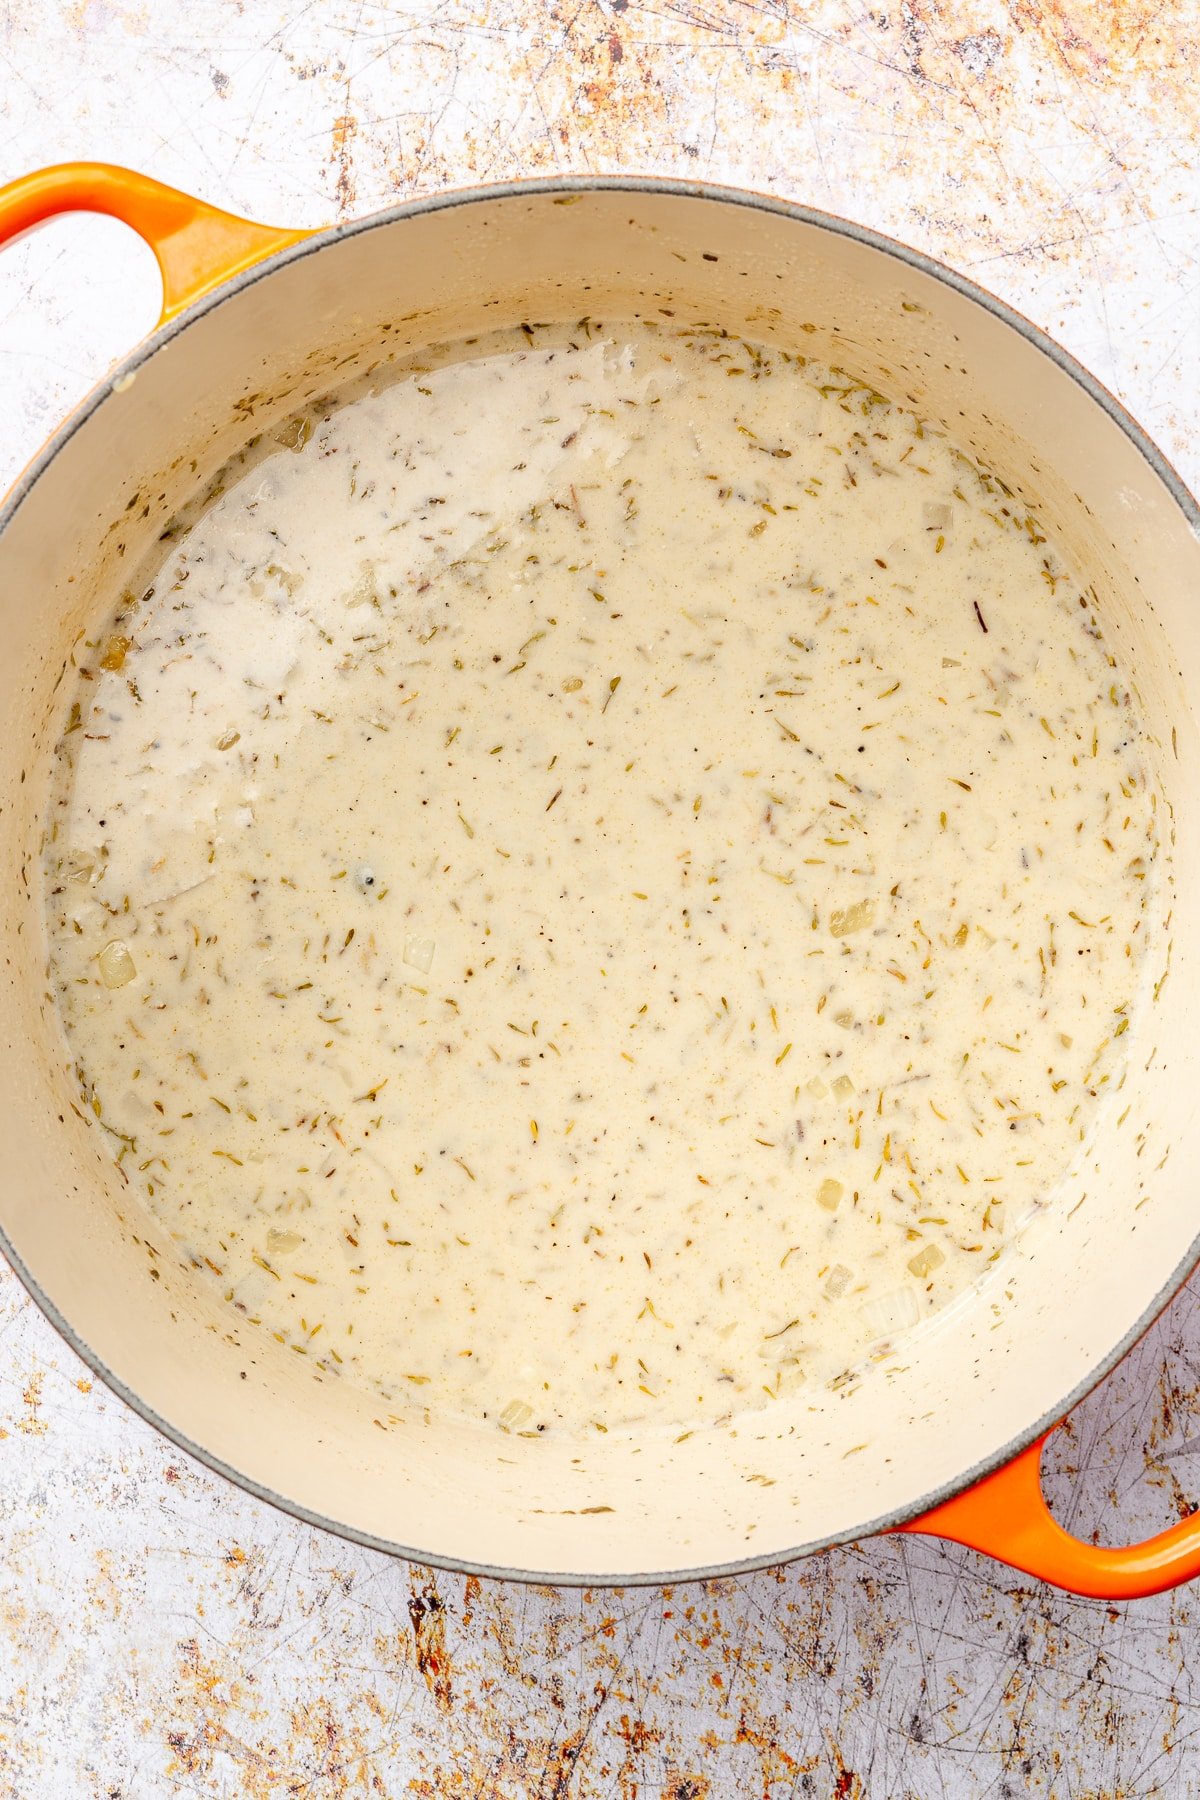 A creamy mixture of spices and sits in an enameled pot.